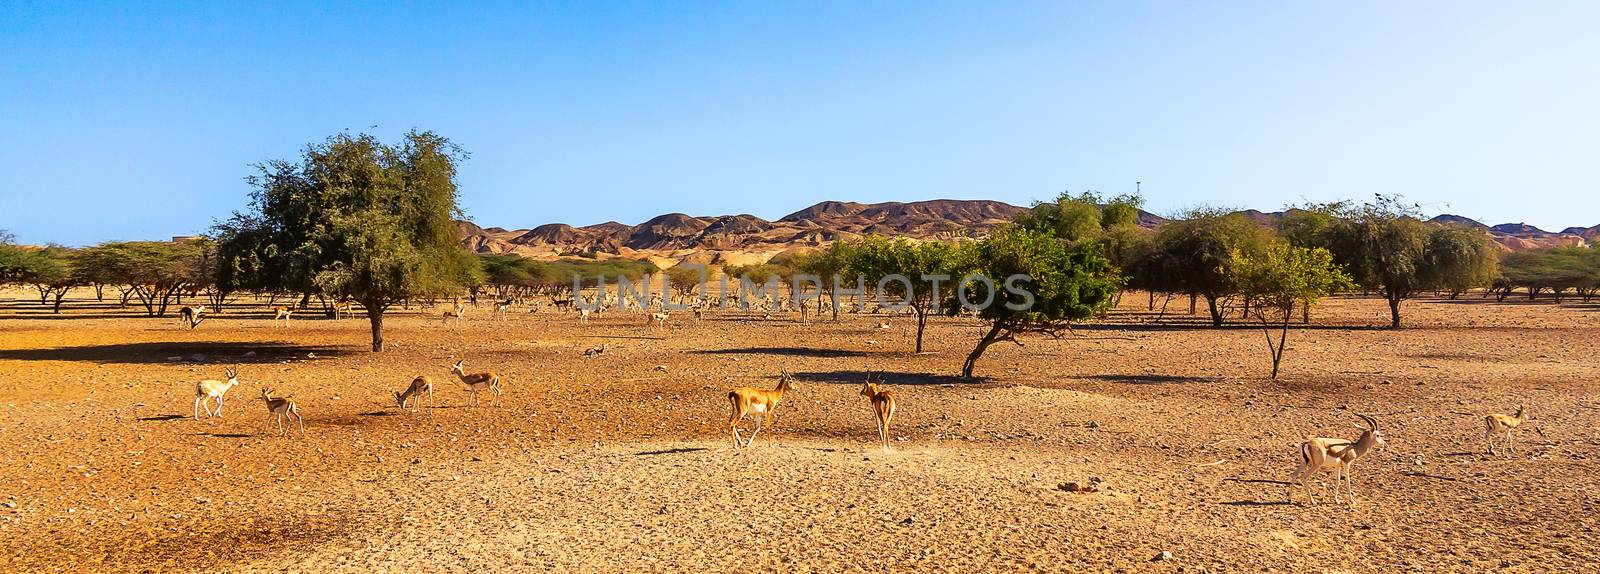 Panoramic view of the safari park on the island of Sir Bani Jas with walking antelope by galsand